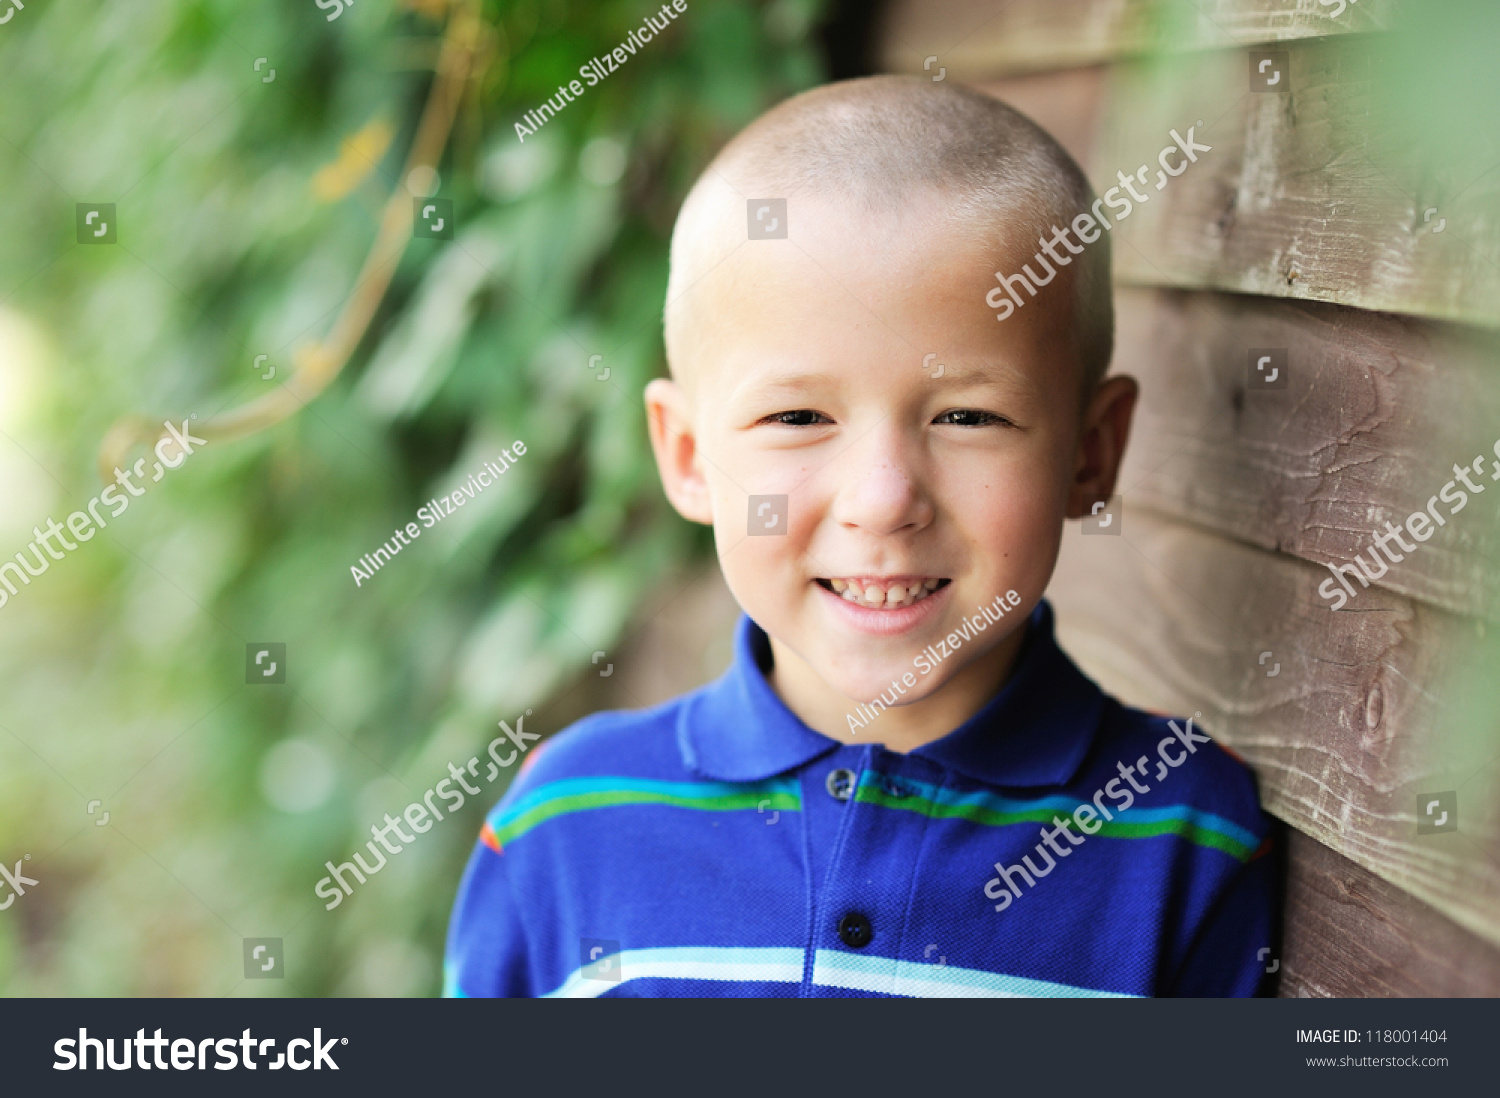 Portrait Of Little Boy Posing Outdoors In Front Of Wooden